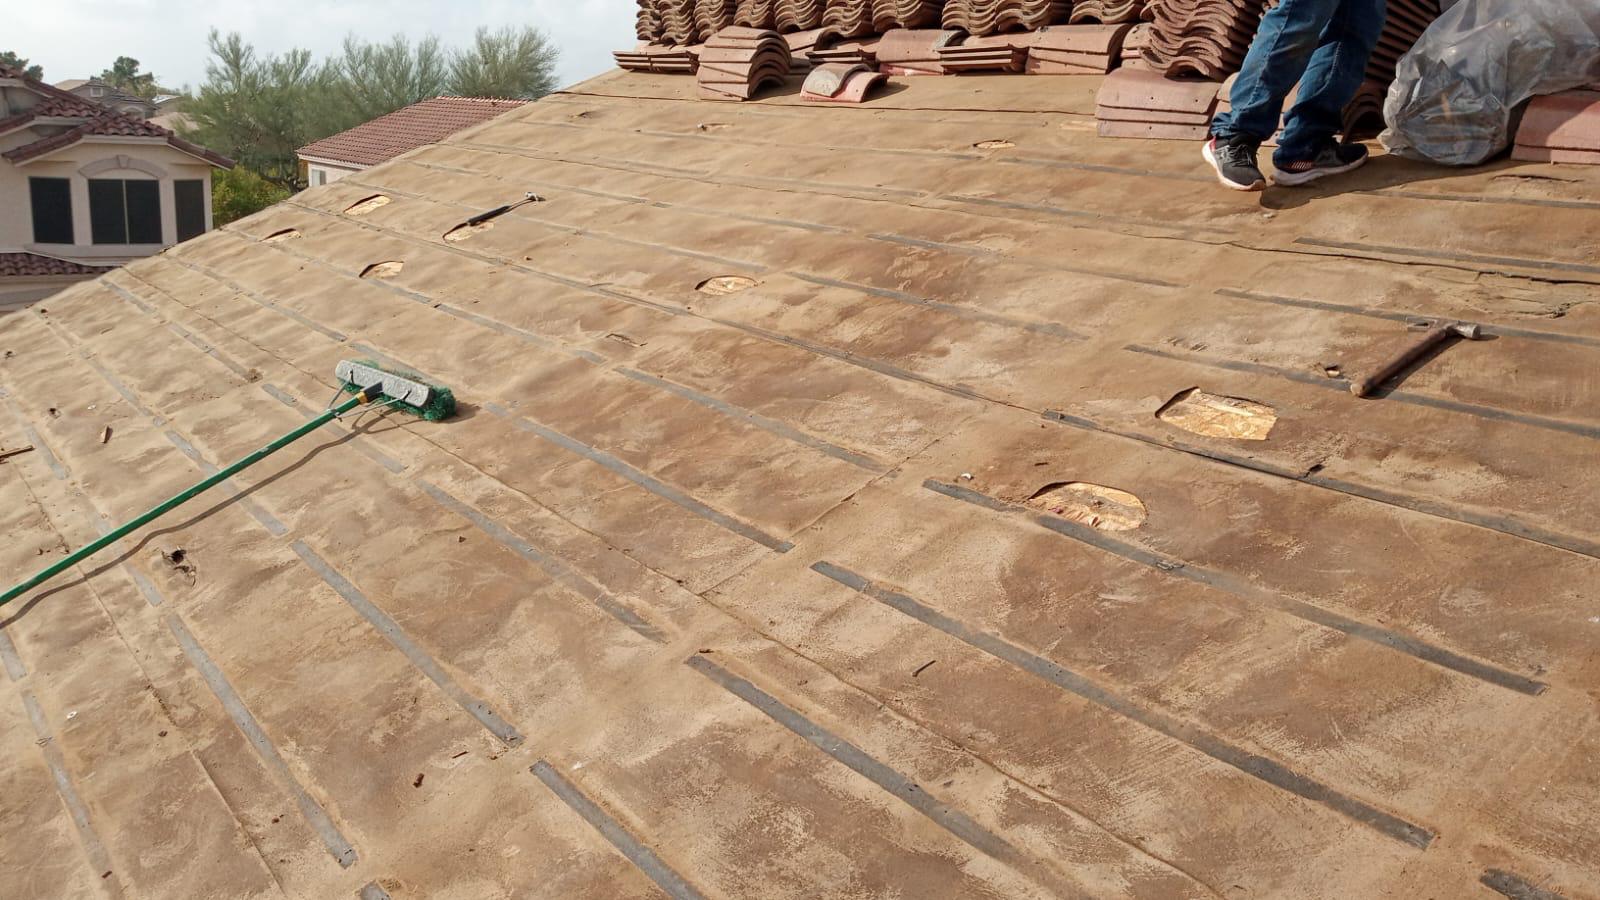 Precision and attention to detail on display as a Behmer professional marks the underlayment during a tile re-felt job in Phoenix, with a view of the surrounding neighborhood.